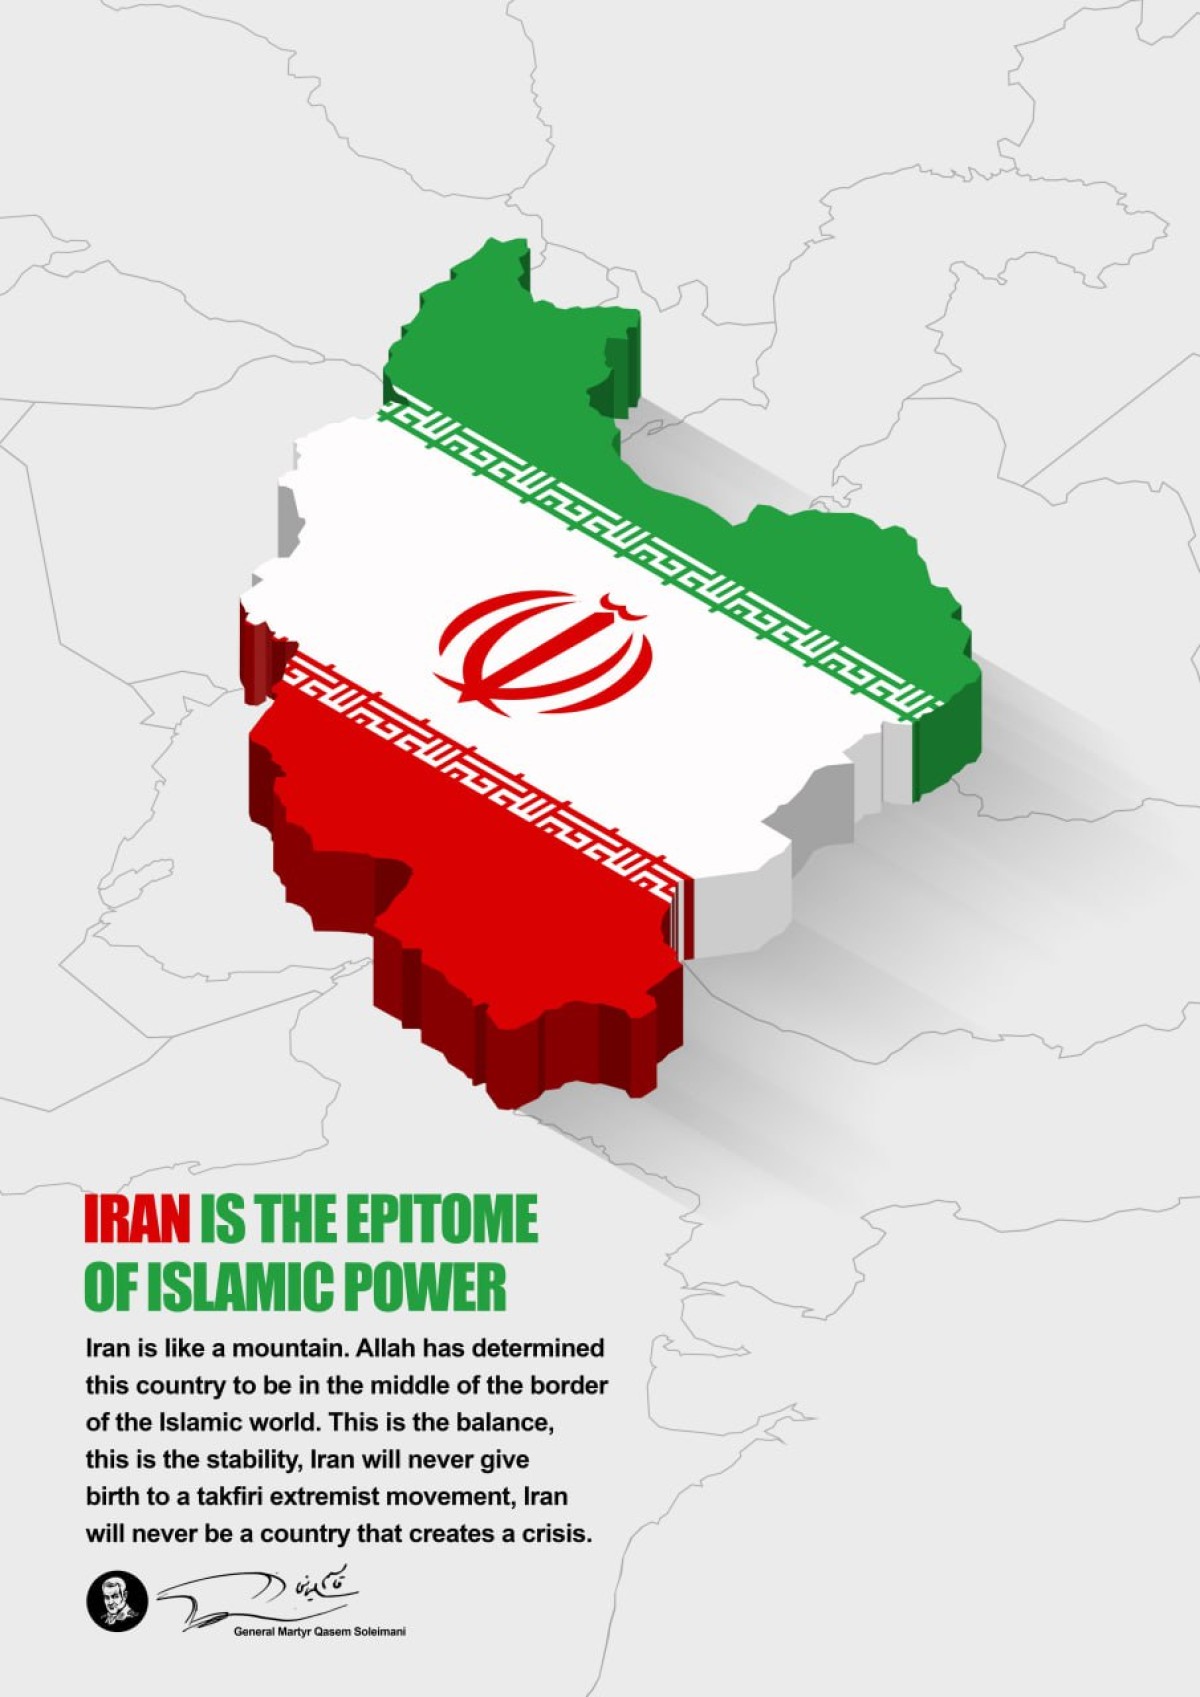 Iran is the Epitome of Islamic Power